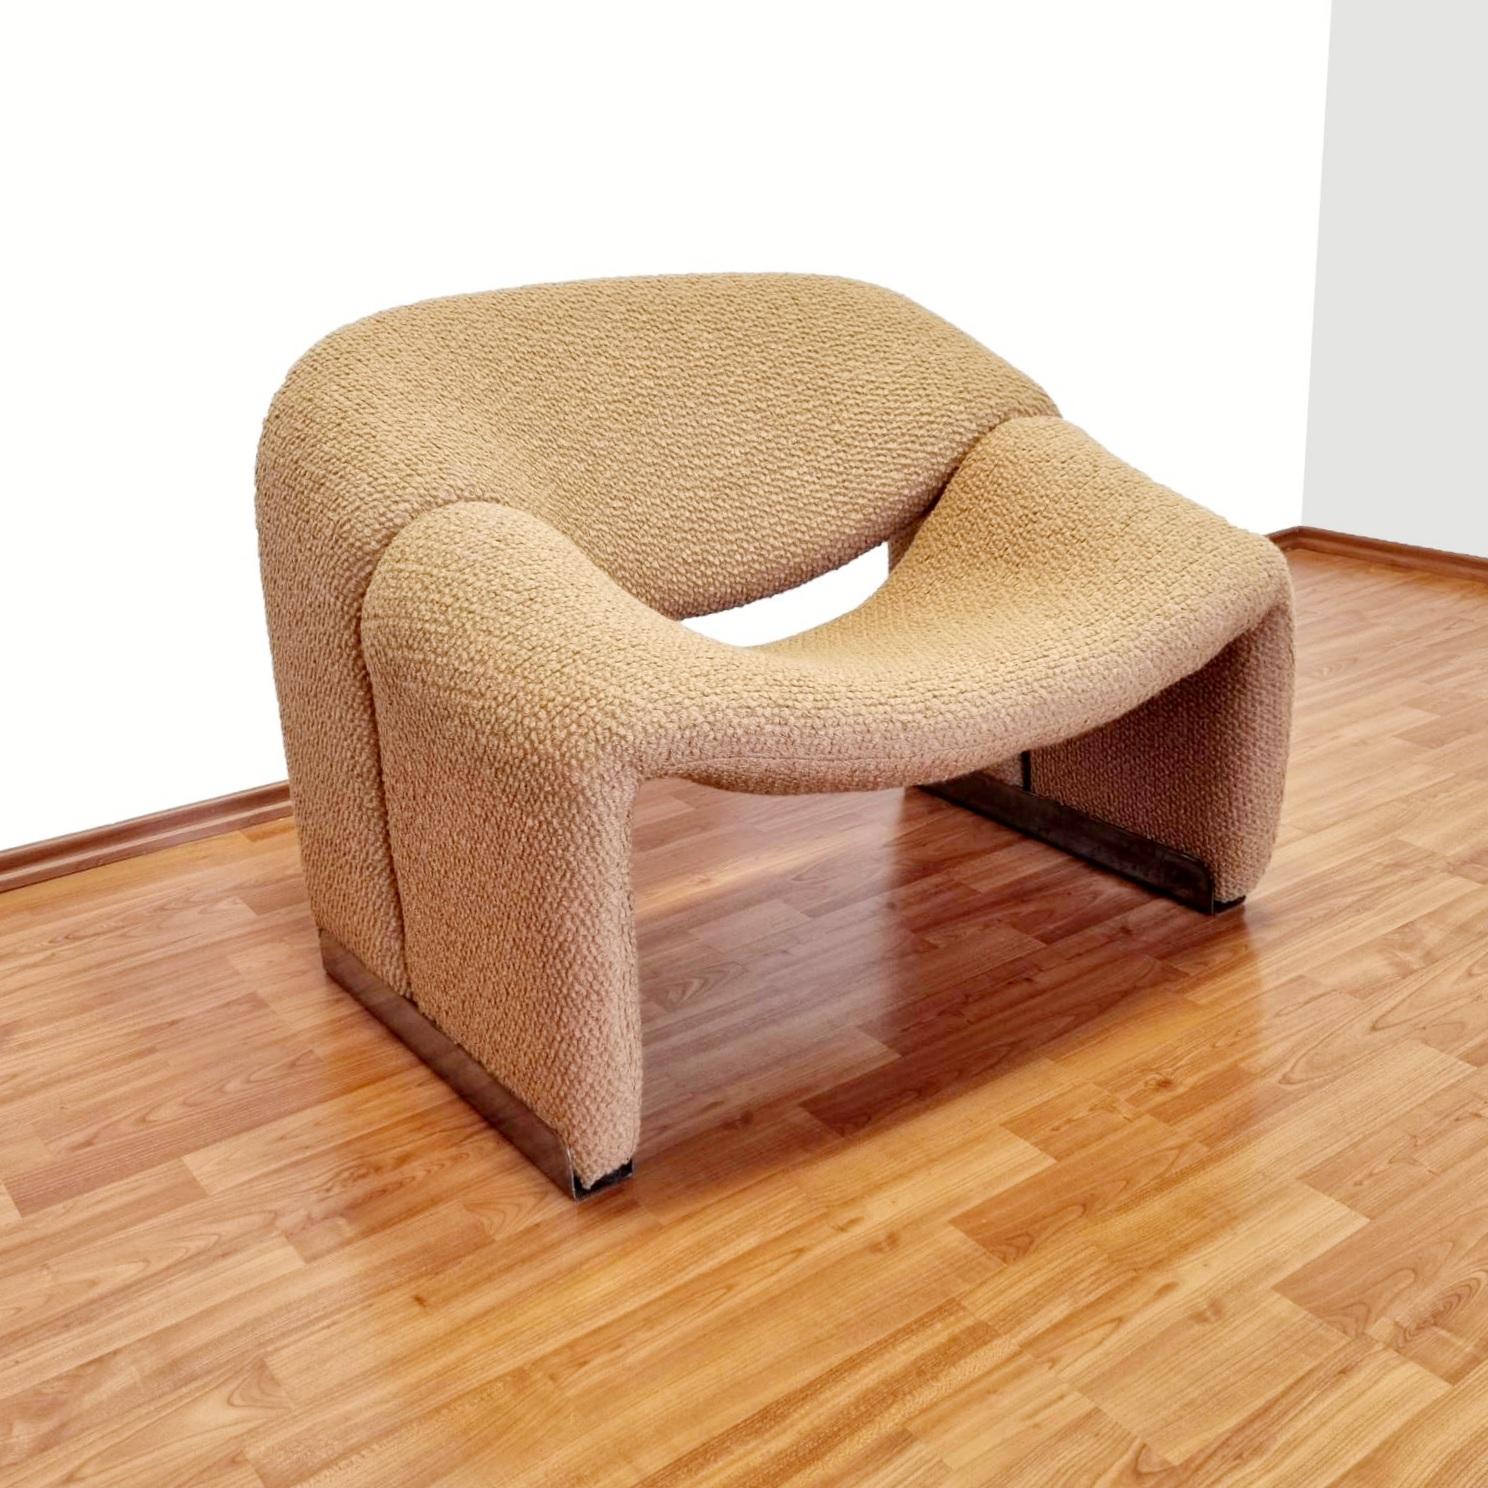 The Groovy chair, or F598, was designed in 1973 by France’s top designer Pierre Paulin for Holland’s most Avant-Garde furniture maker Artifort.
Their compactness combined with great comfort and of course, iconic looks made this chair one of the